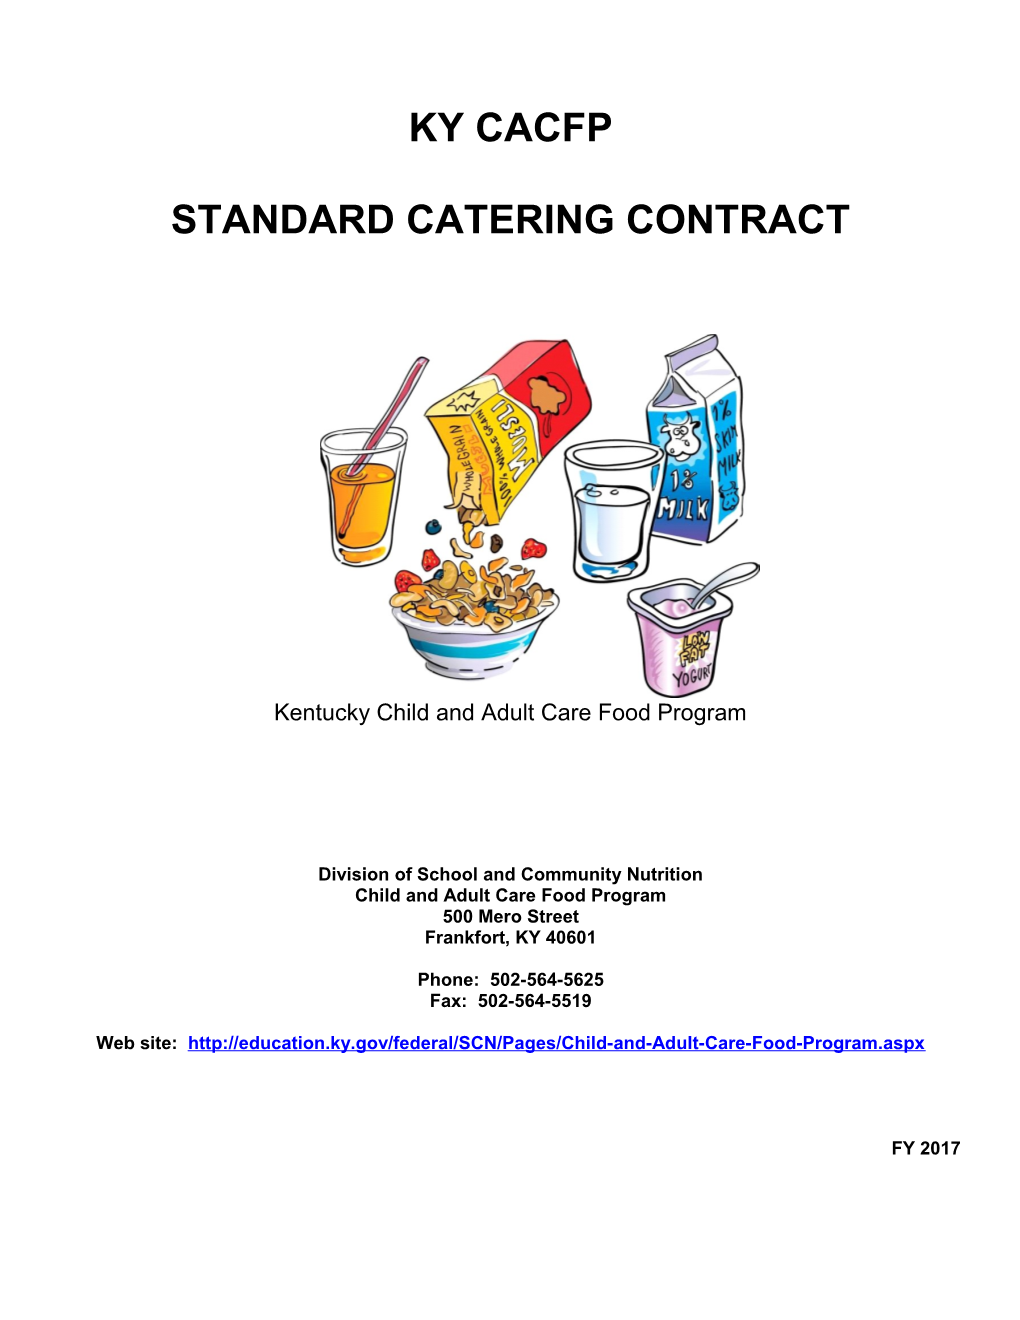 Standard Catering Contract